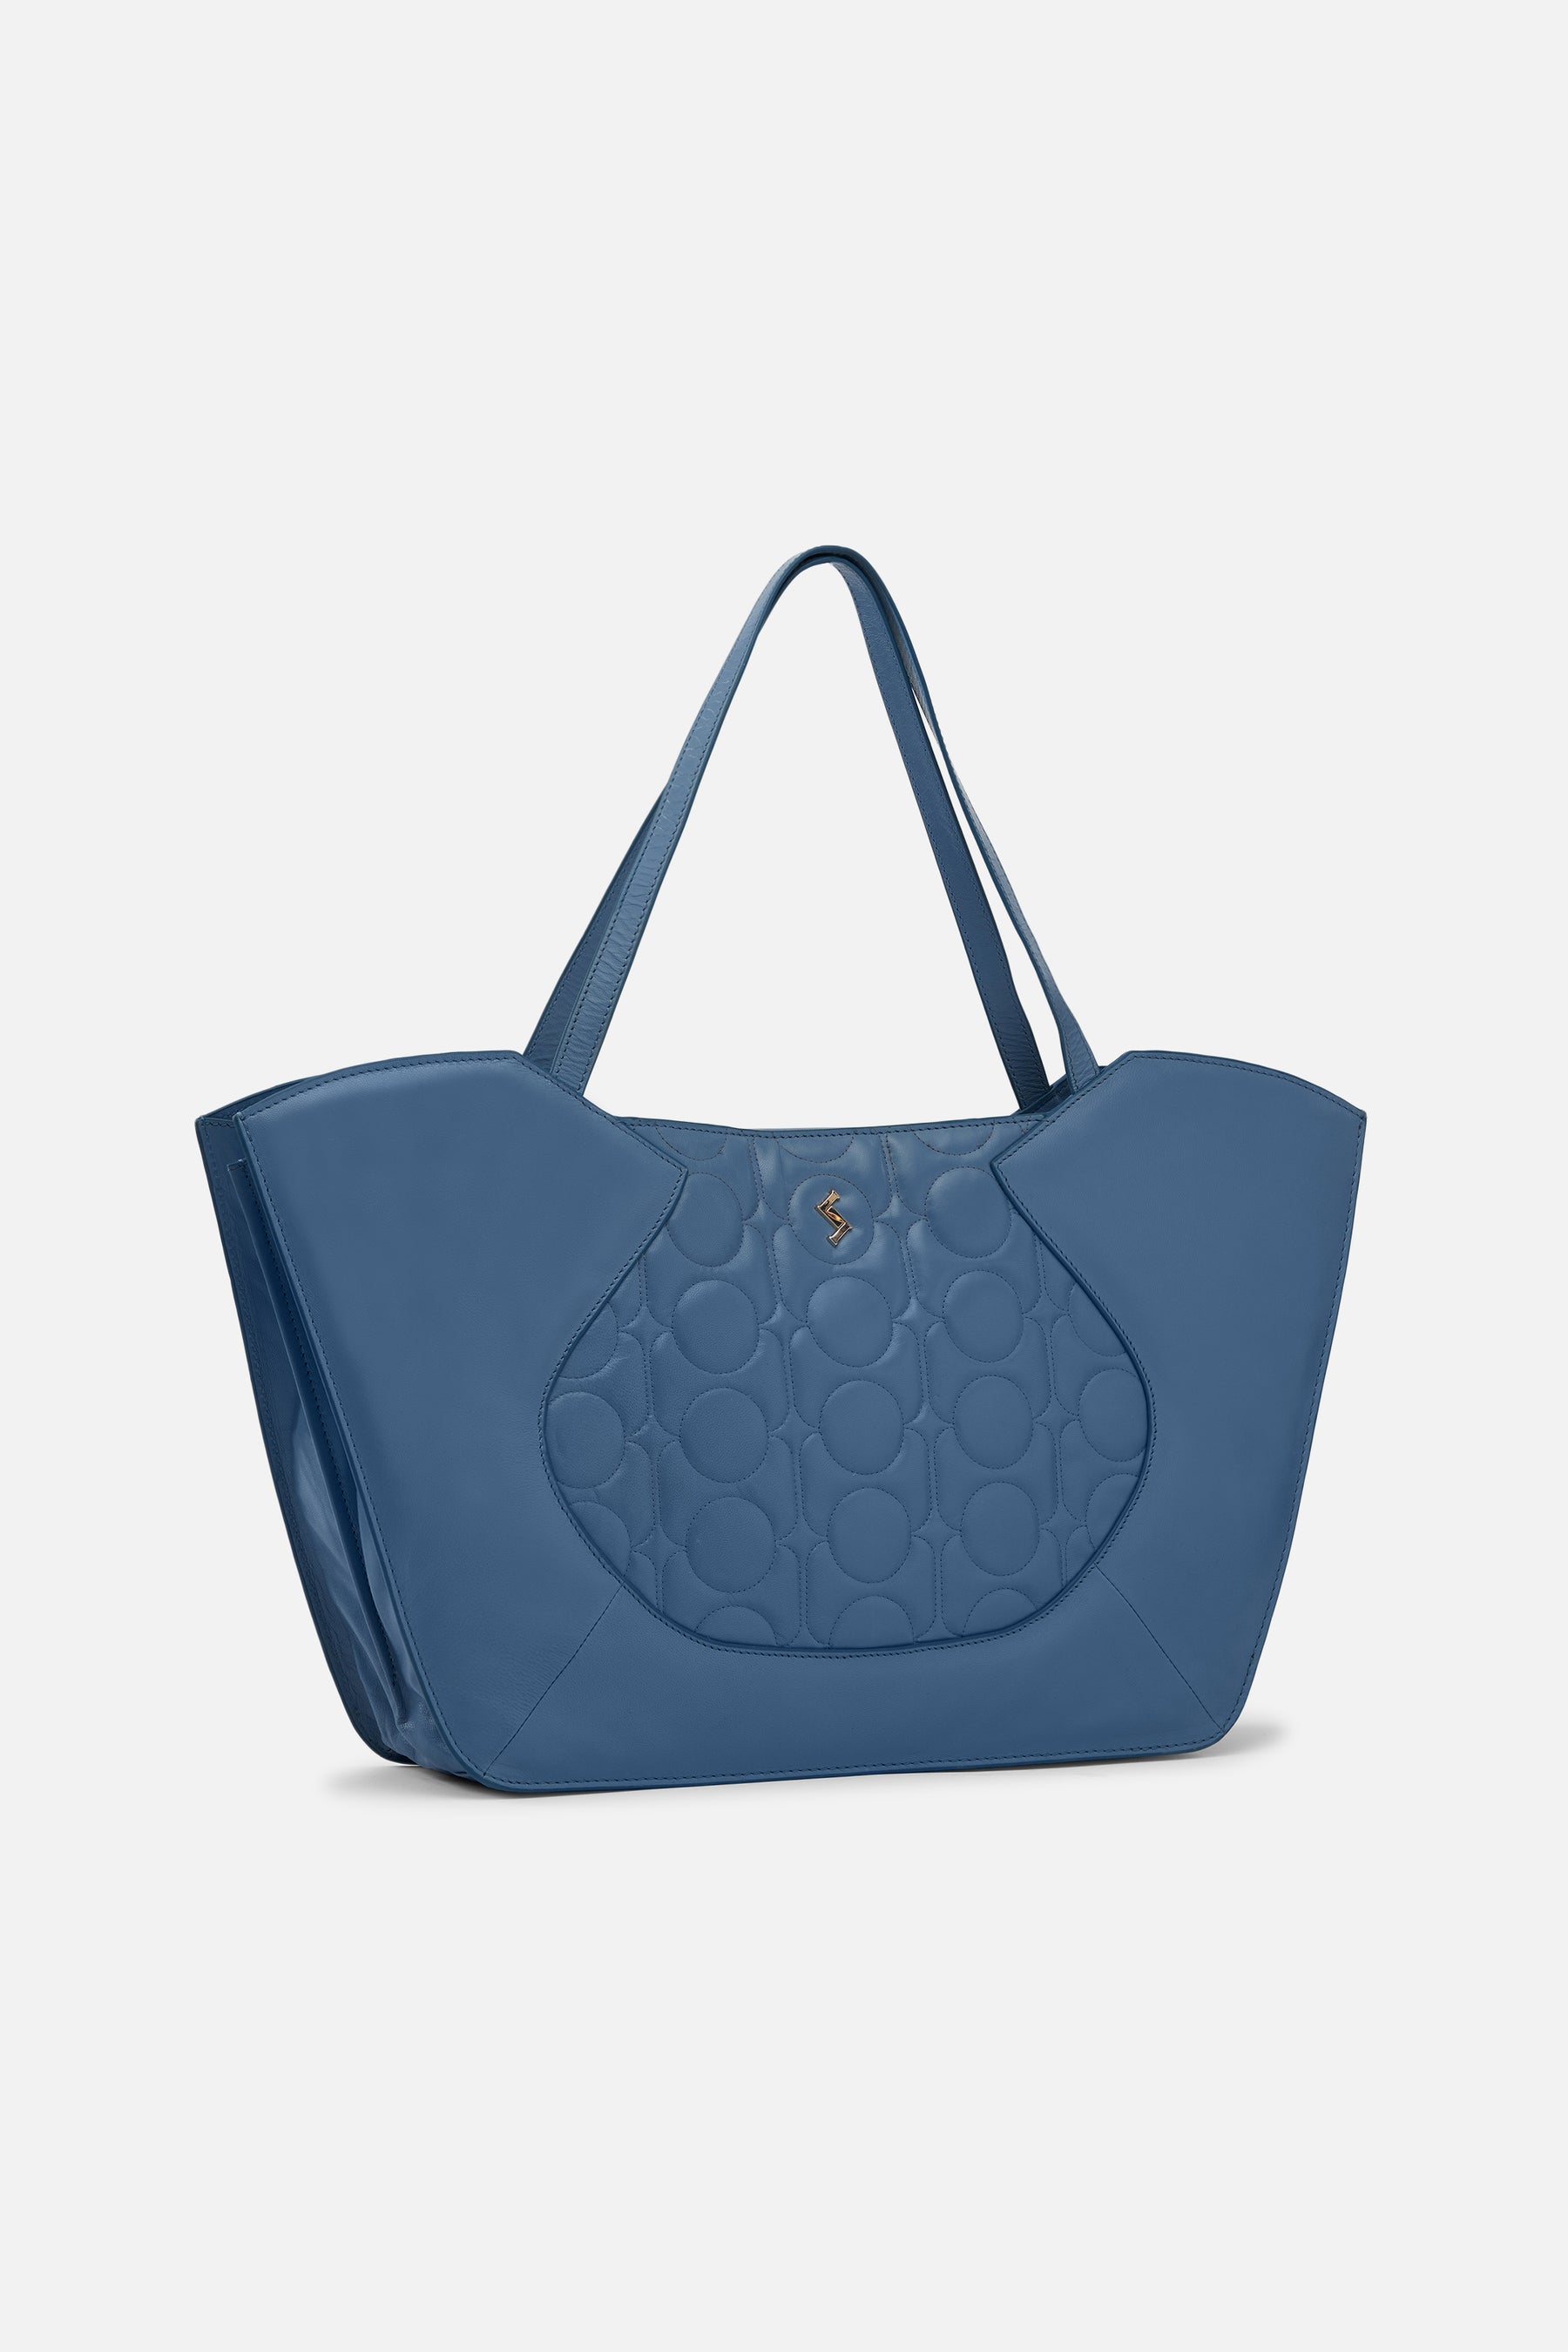 Evelyn - Quilted Tote - Smoke Blue